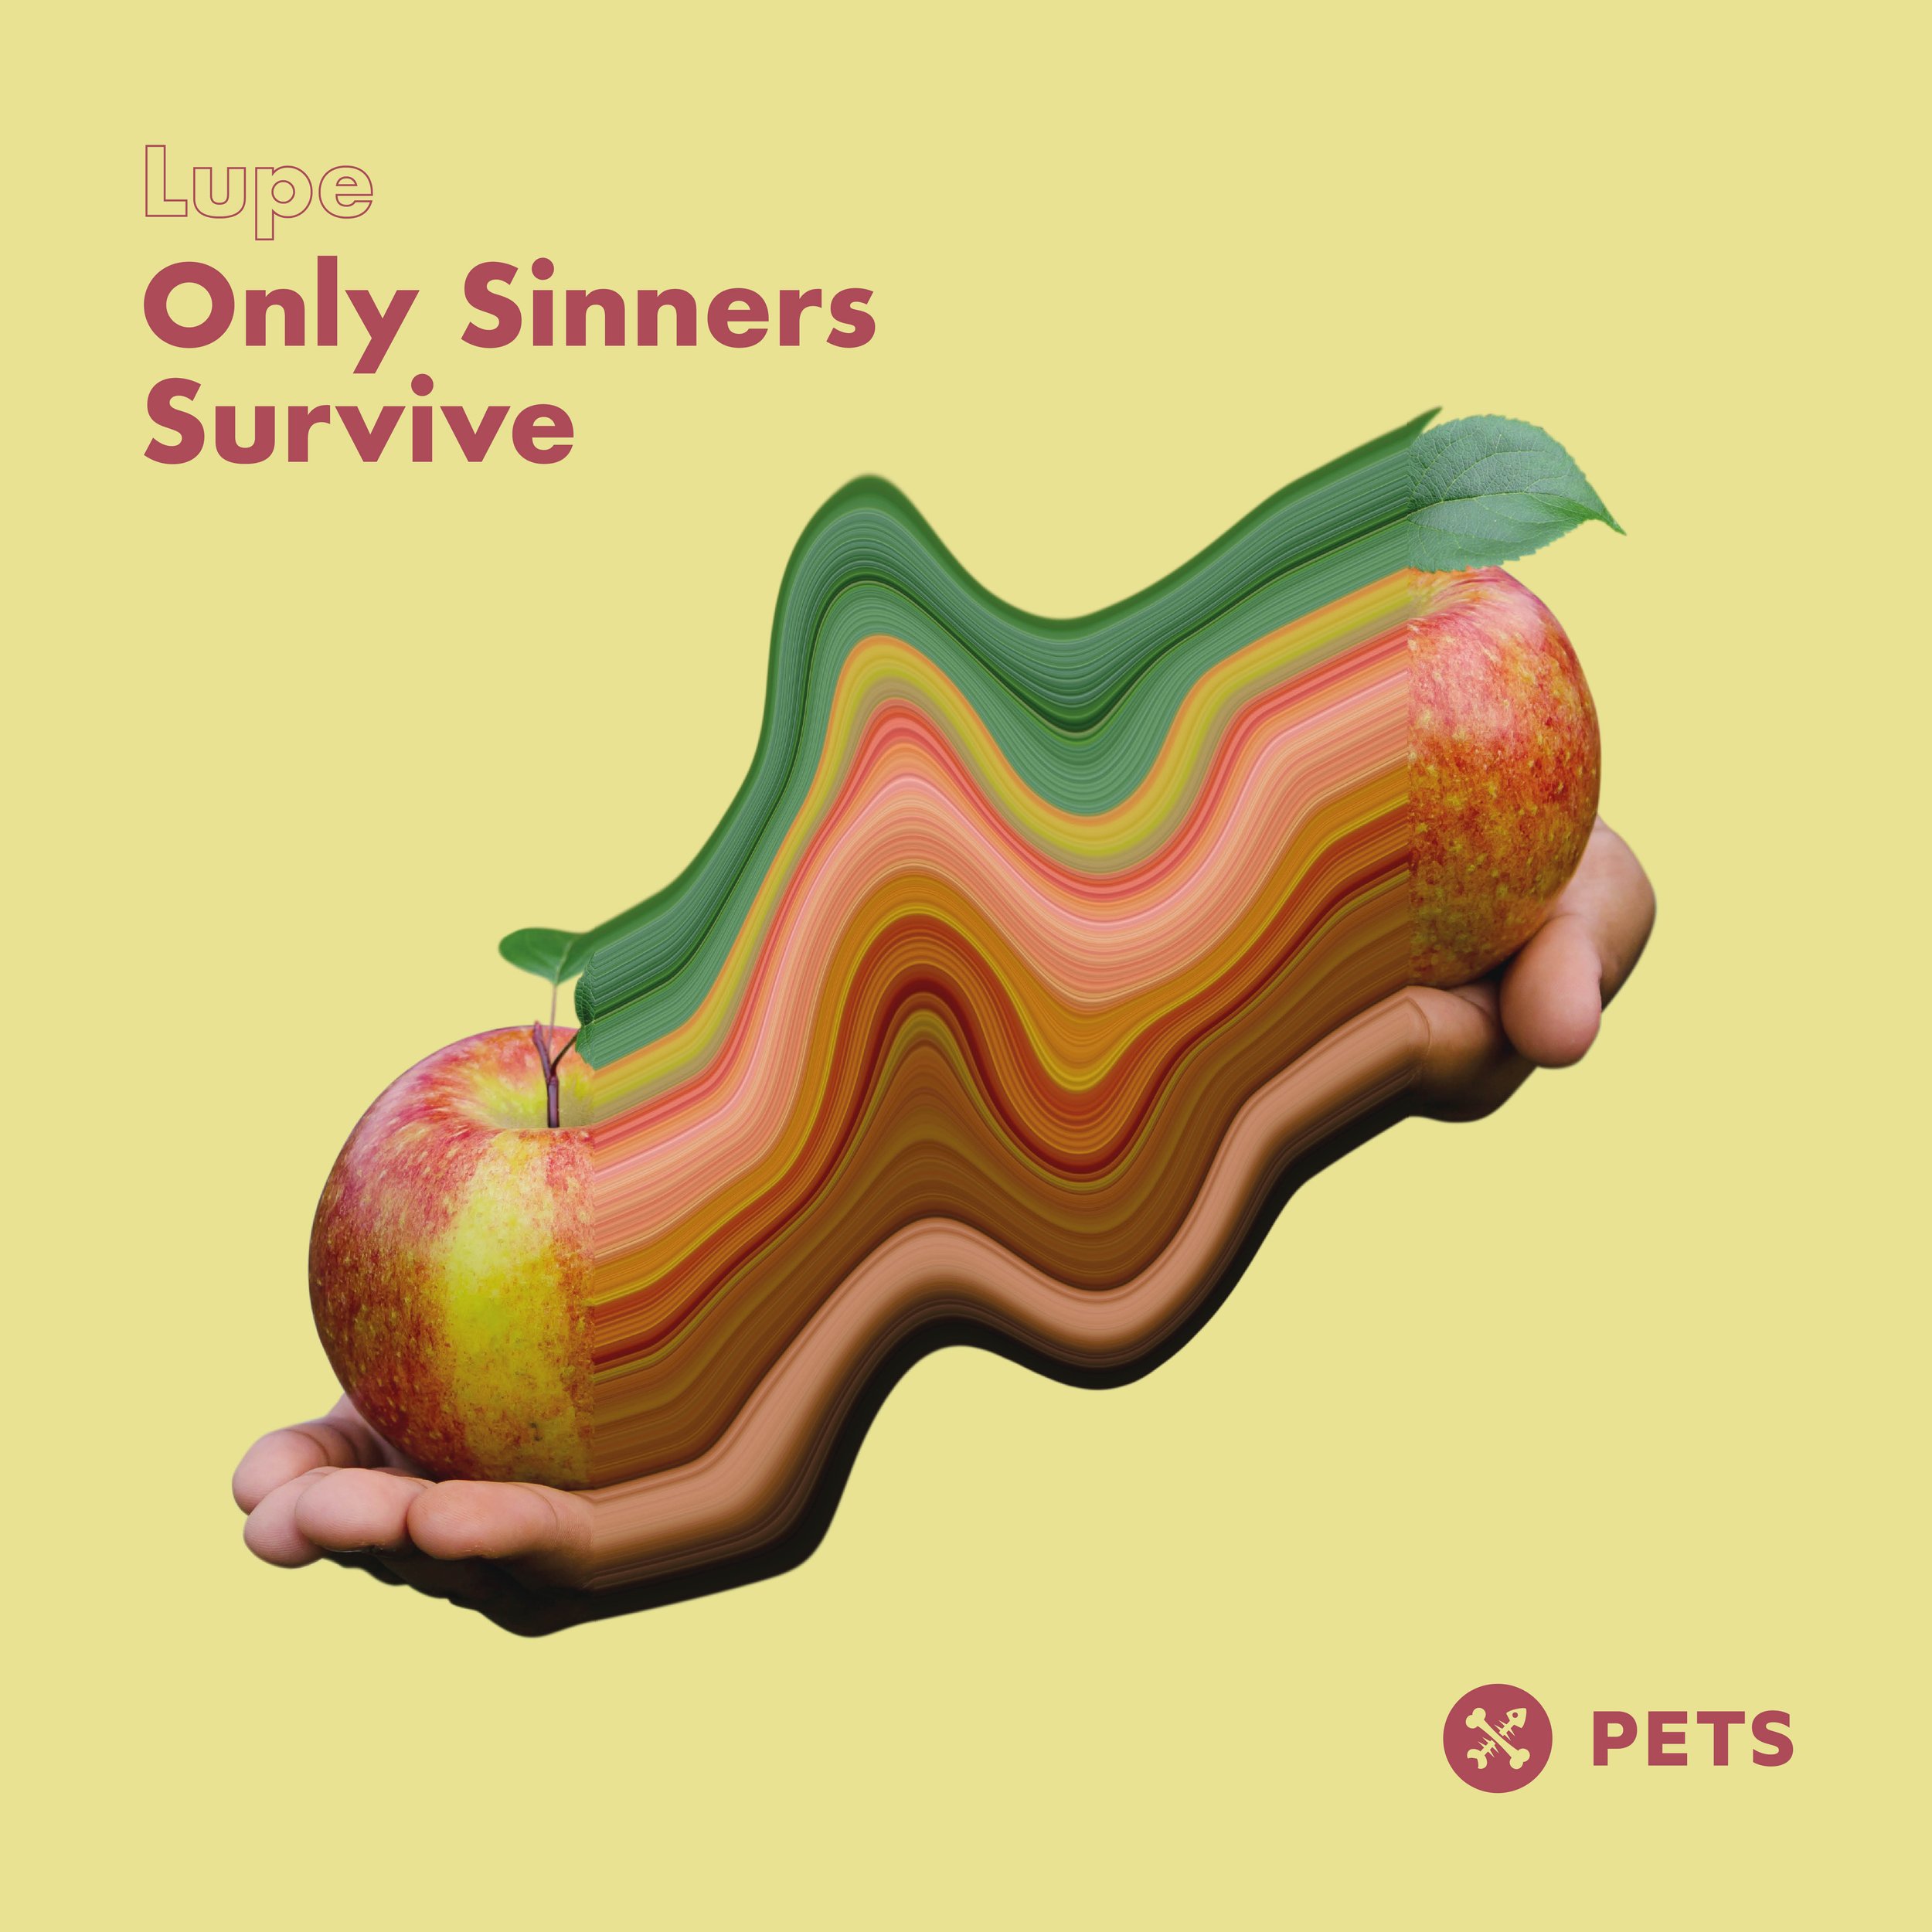 Lupe - Only Sinners Survive [PETS148]